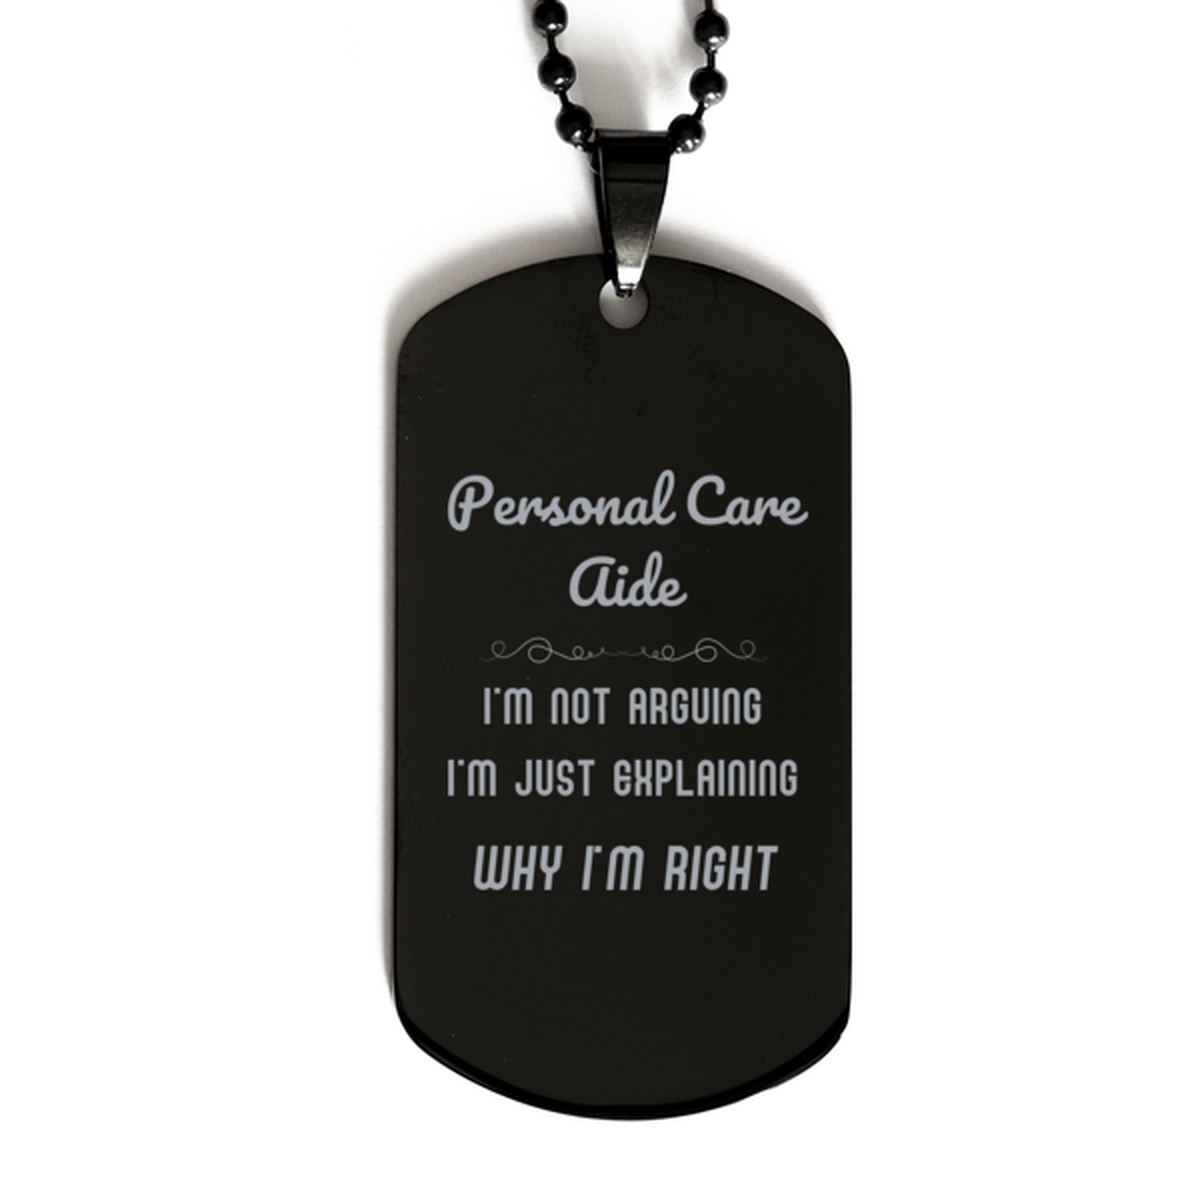 Personal Care Aide I'm not Arguing. I'm Just Explaining Why I'm RIGHT Black Dog Tag, Funny Saying Quote Personal Care Aide Gifts For Personal Care Aide Graduation Birthday Christmas Gifts for Men Women Coworker